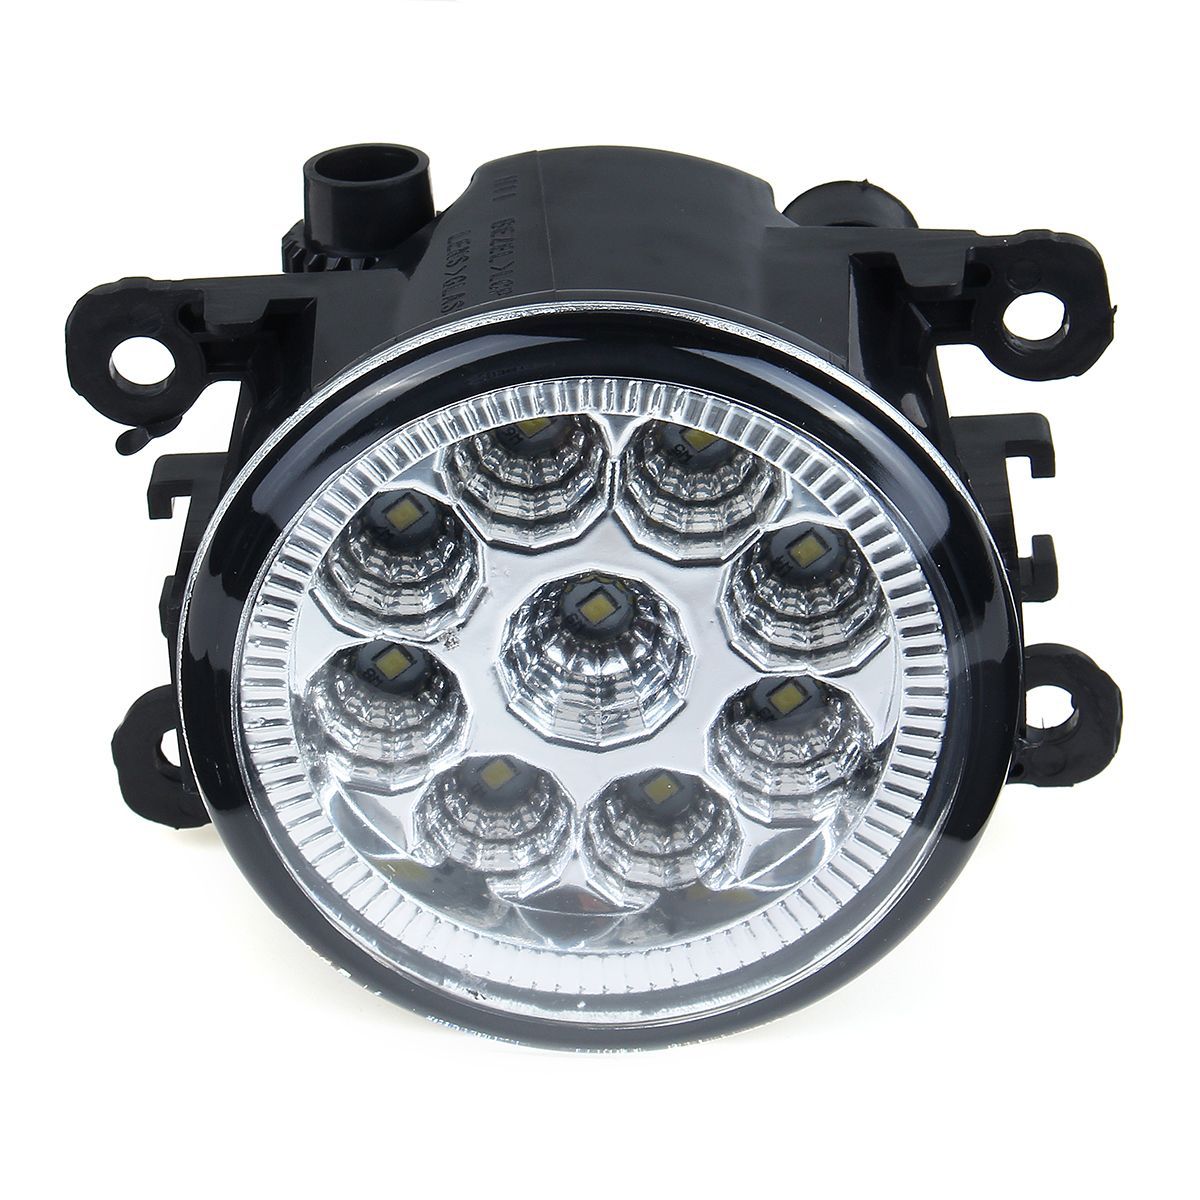 Pair-Car-Front-LED-Fog-Lights-Lamps-with-H11-Bulbs-White-For-Land-Rover-Discovery-4-Range-Rover-Spor-1609913